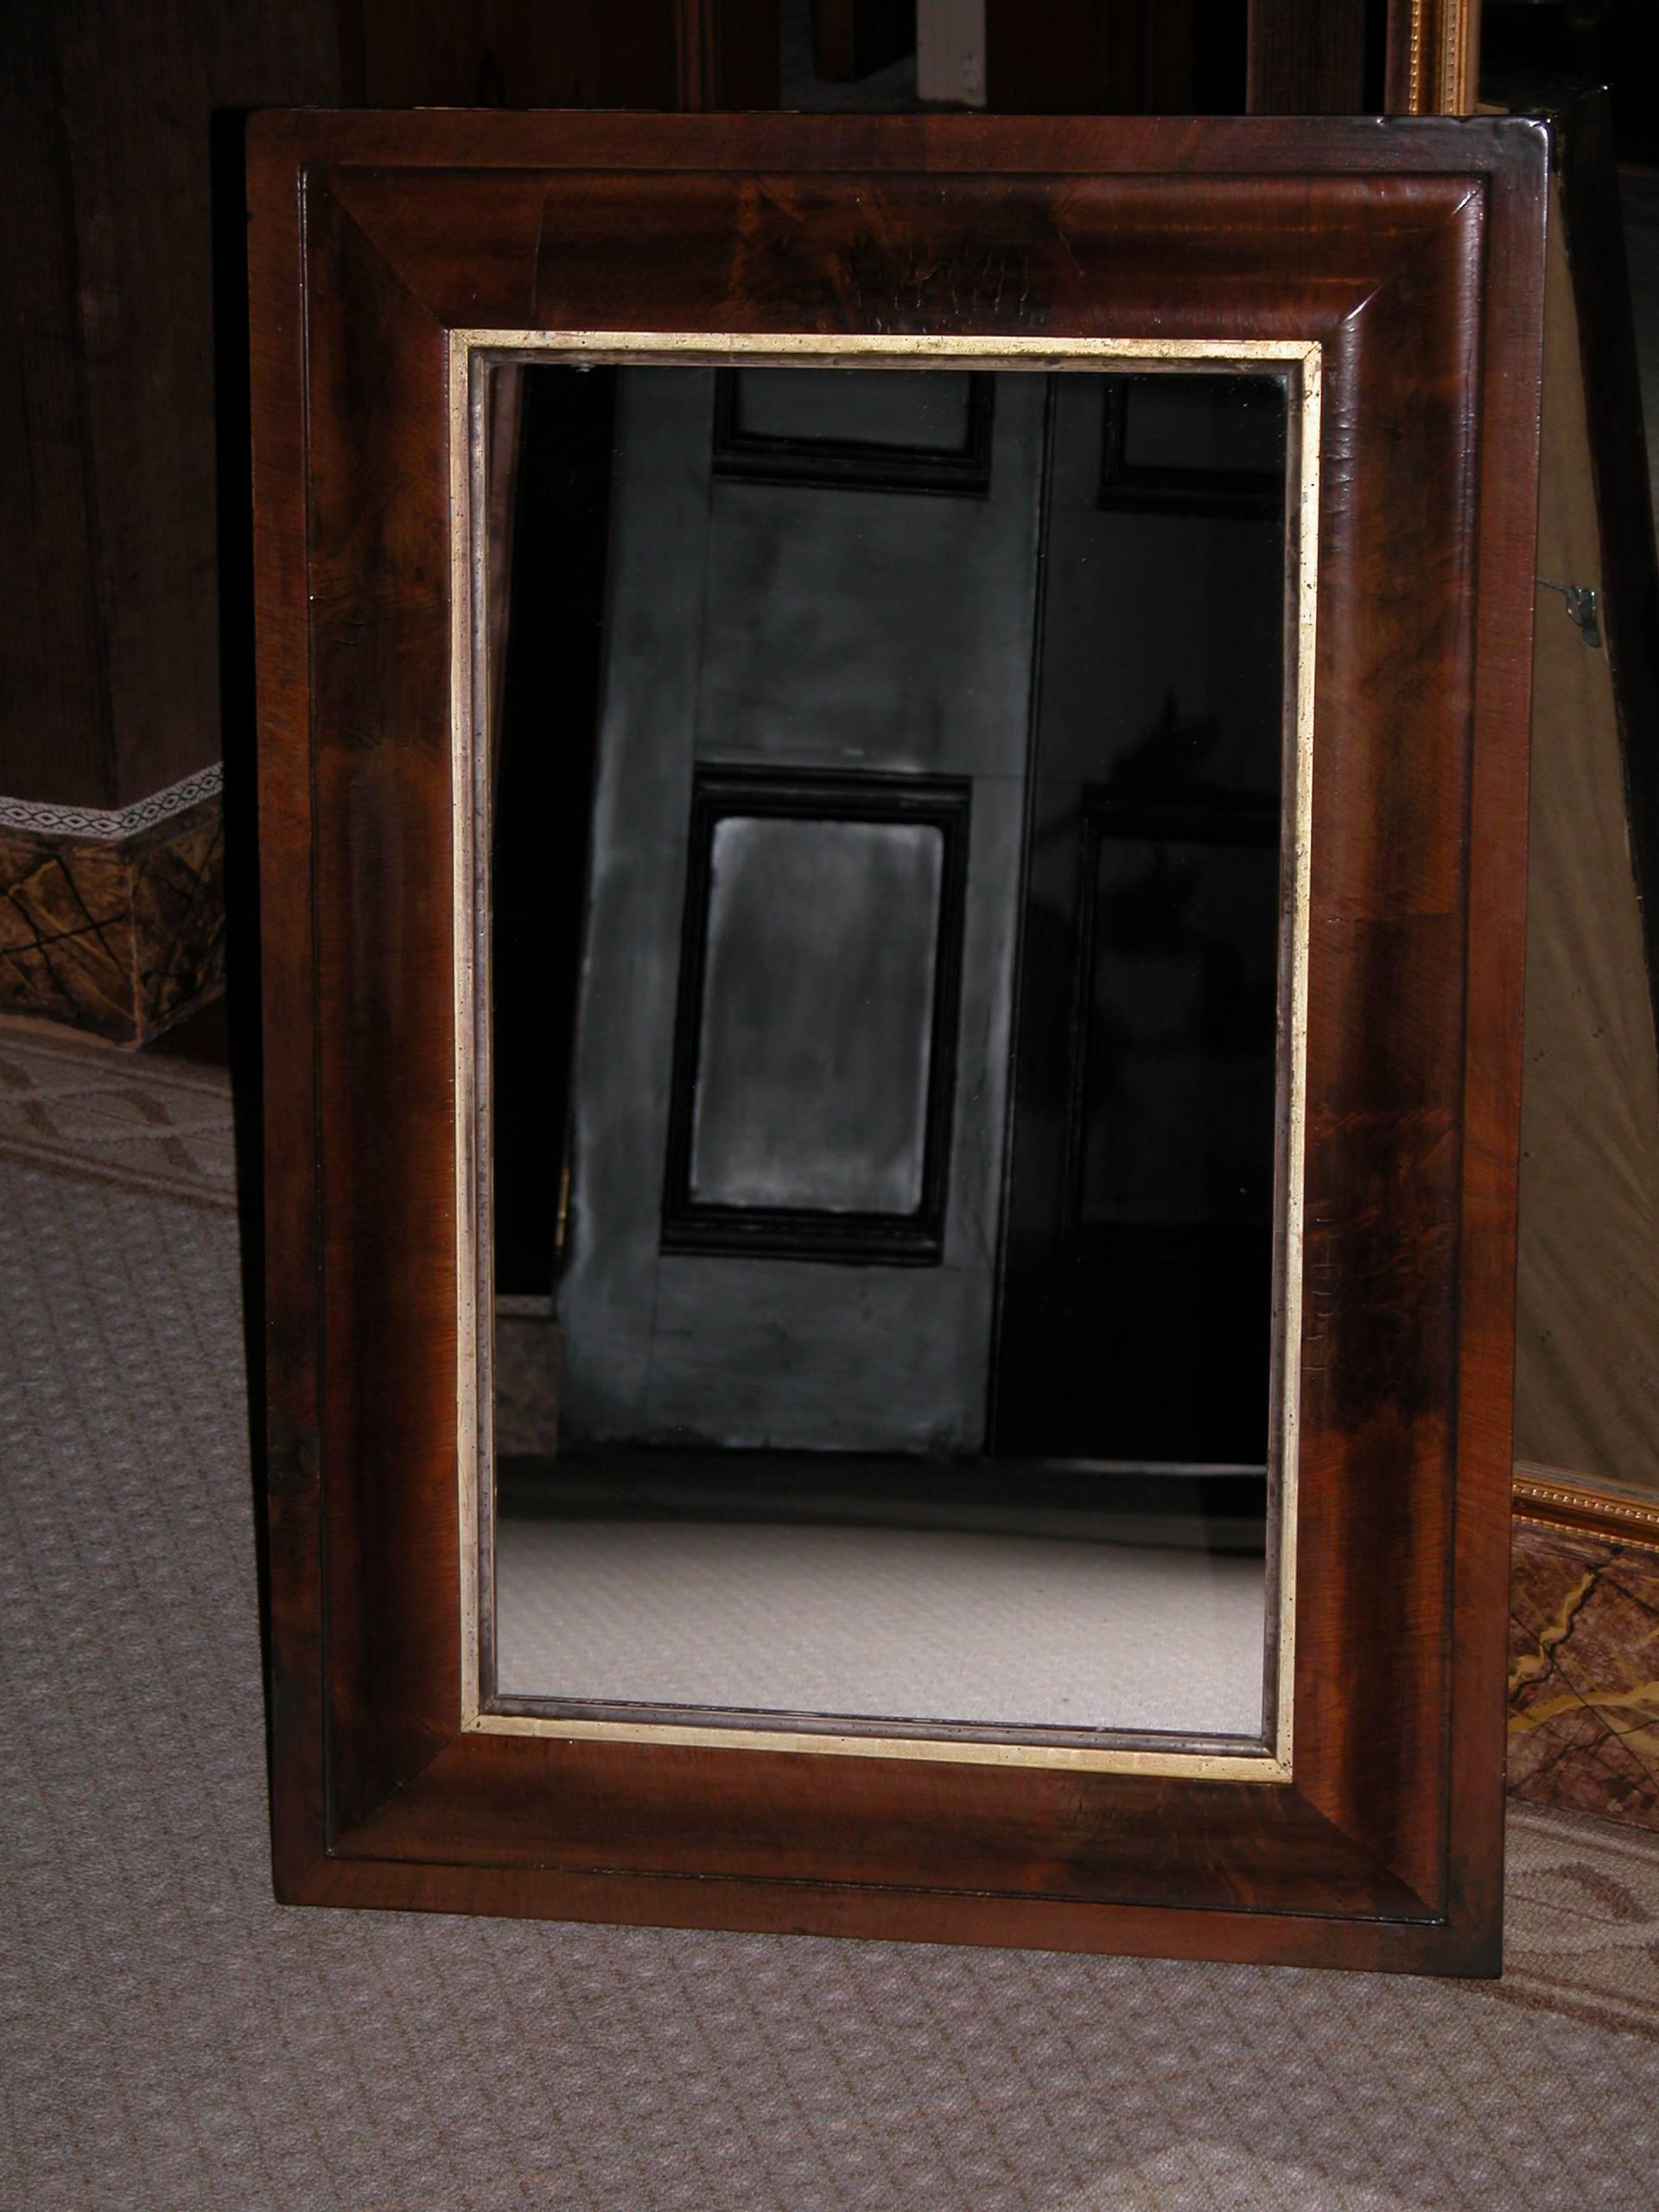 Mahogany frame with giltwood liner, may have held an oil painting originally.